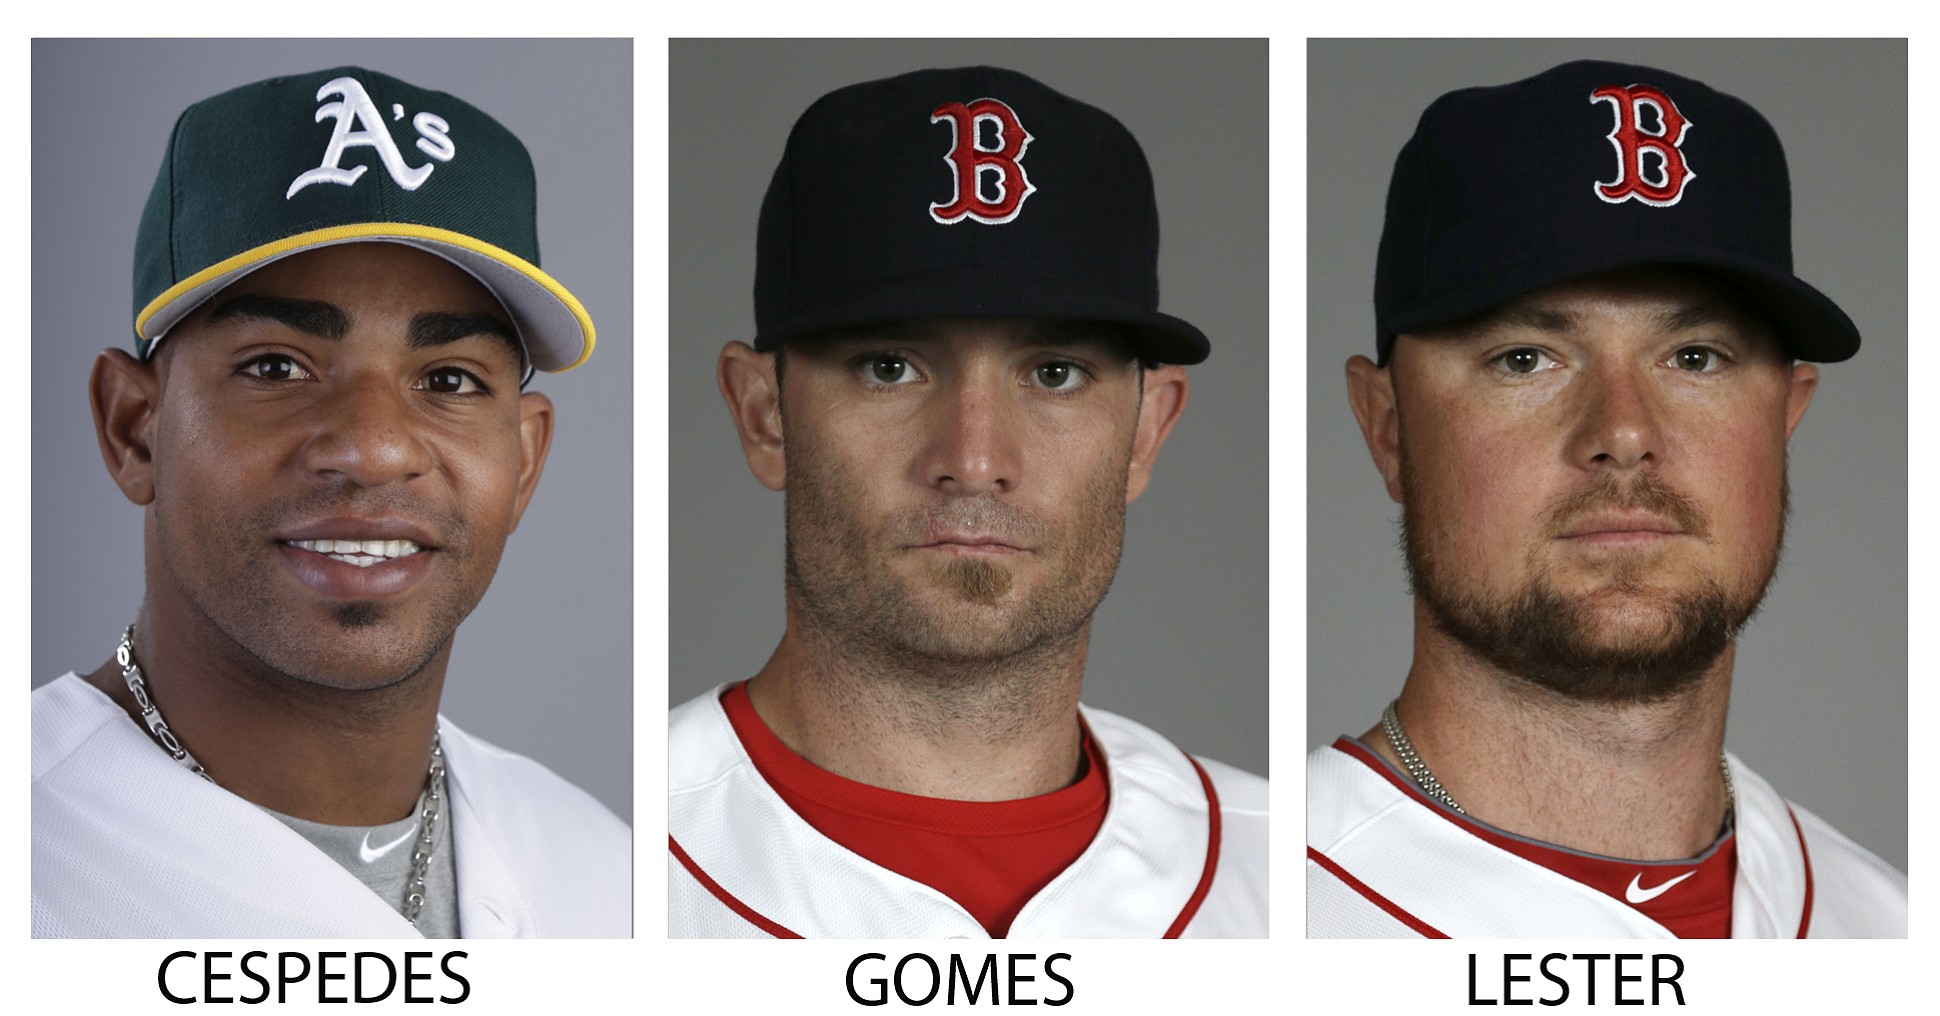 Oakland Athletics' Yoenis Cespedes, and Boston Red Sox players Jonny Gomes and Jon Lester.